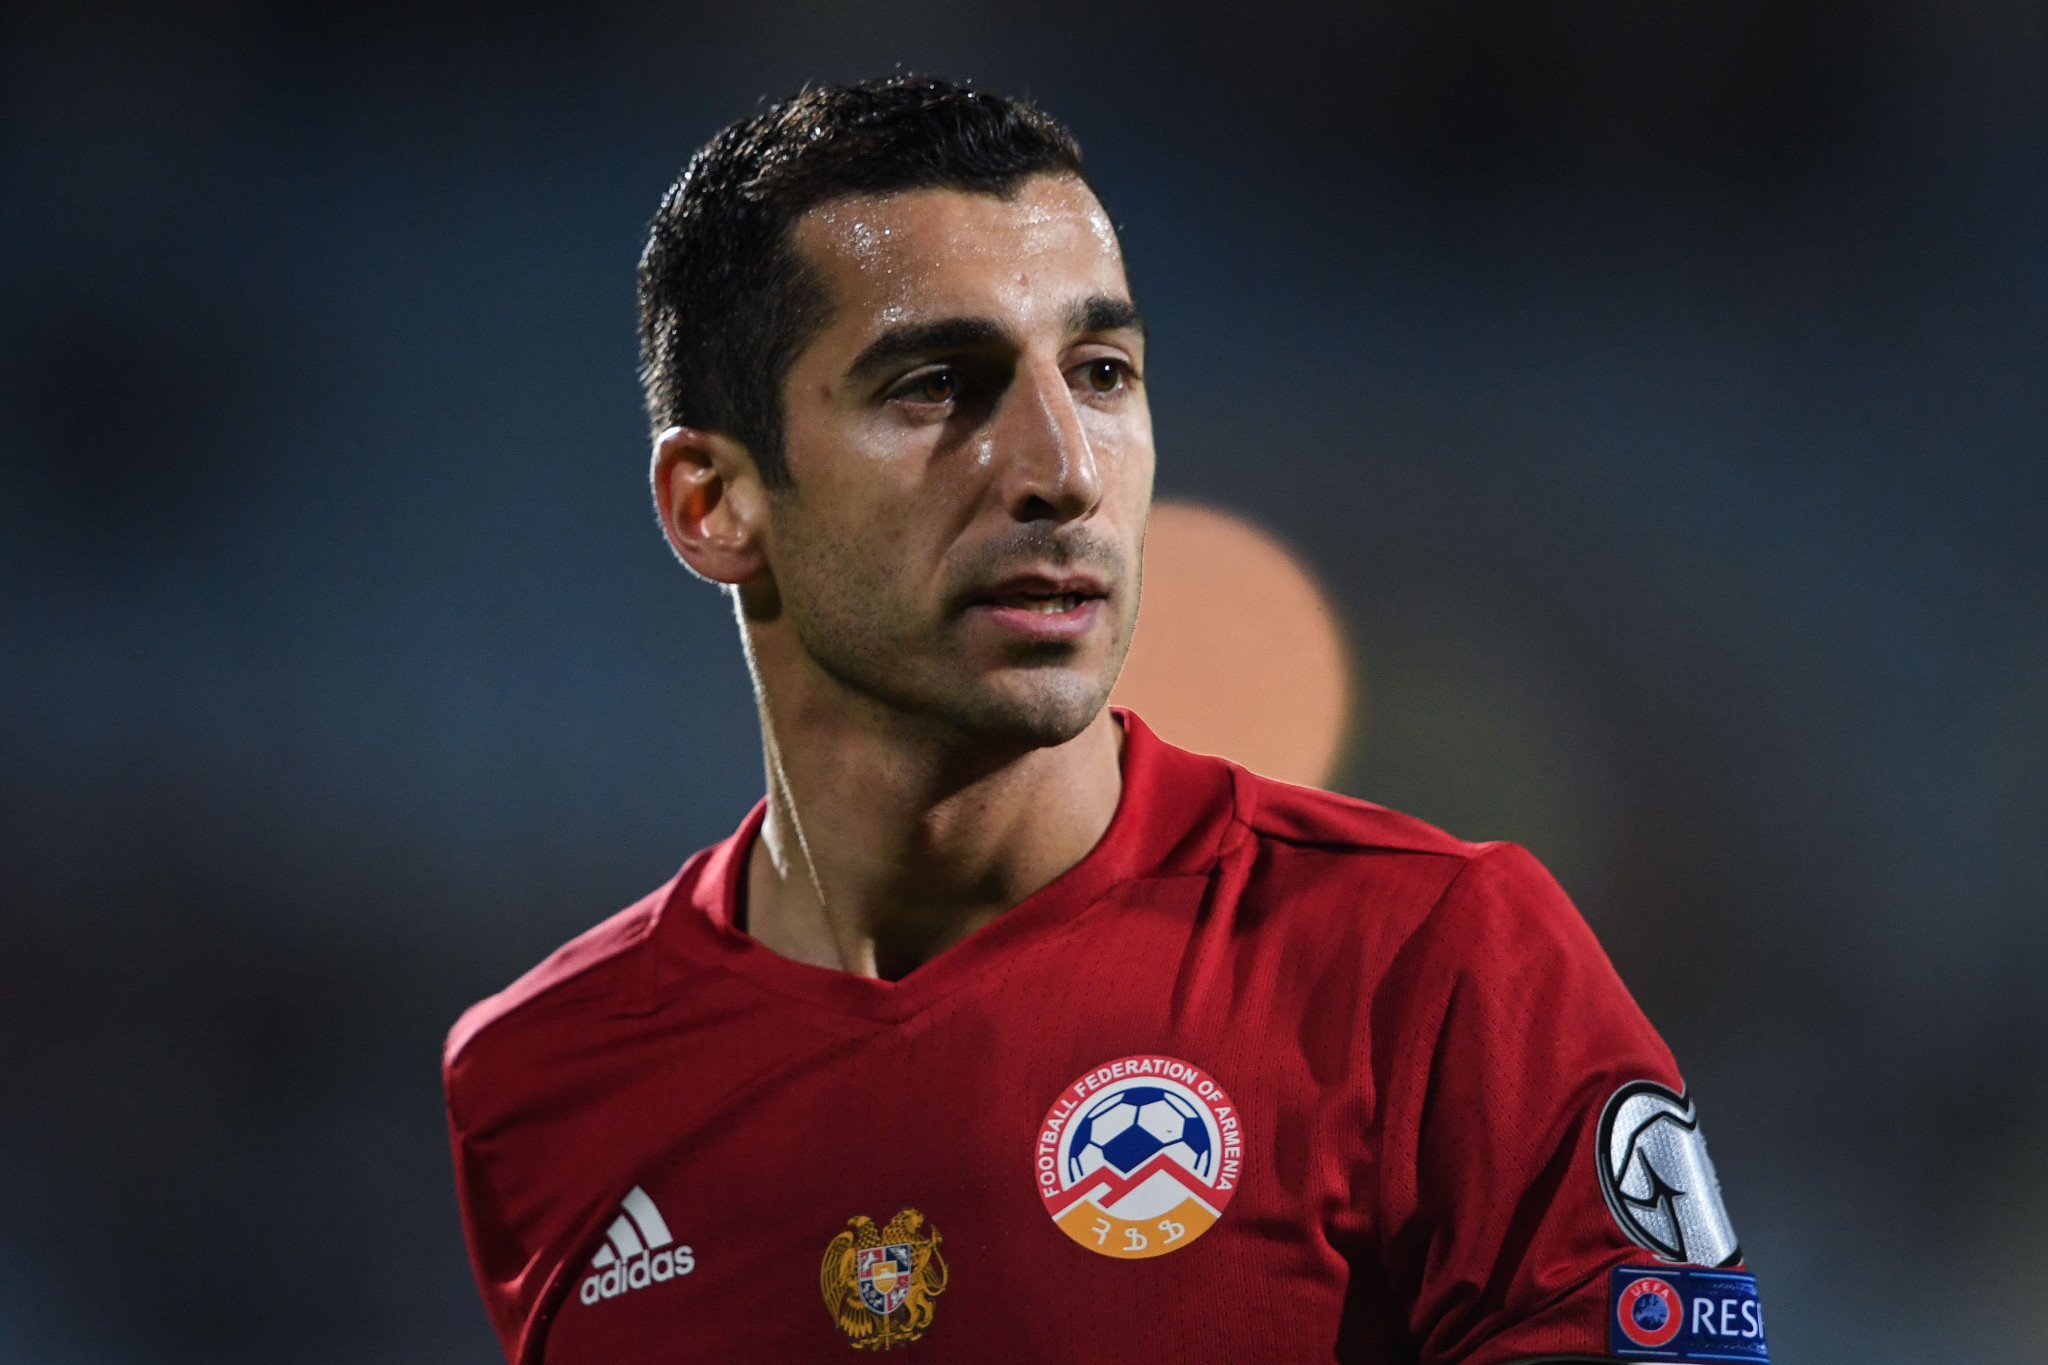 Mkhitaryan urges world to "stand up against ethnic cleansing" in Nagorno-Karabakh after Azerbaijan's offensive